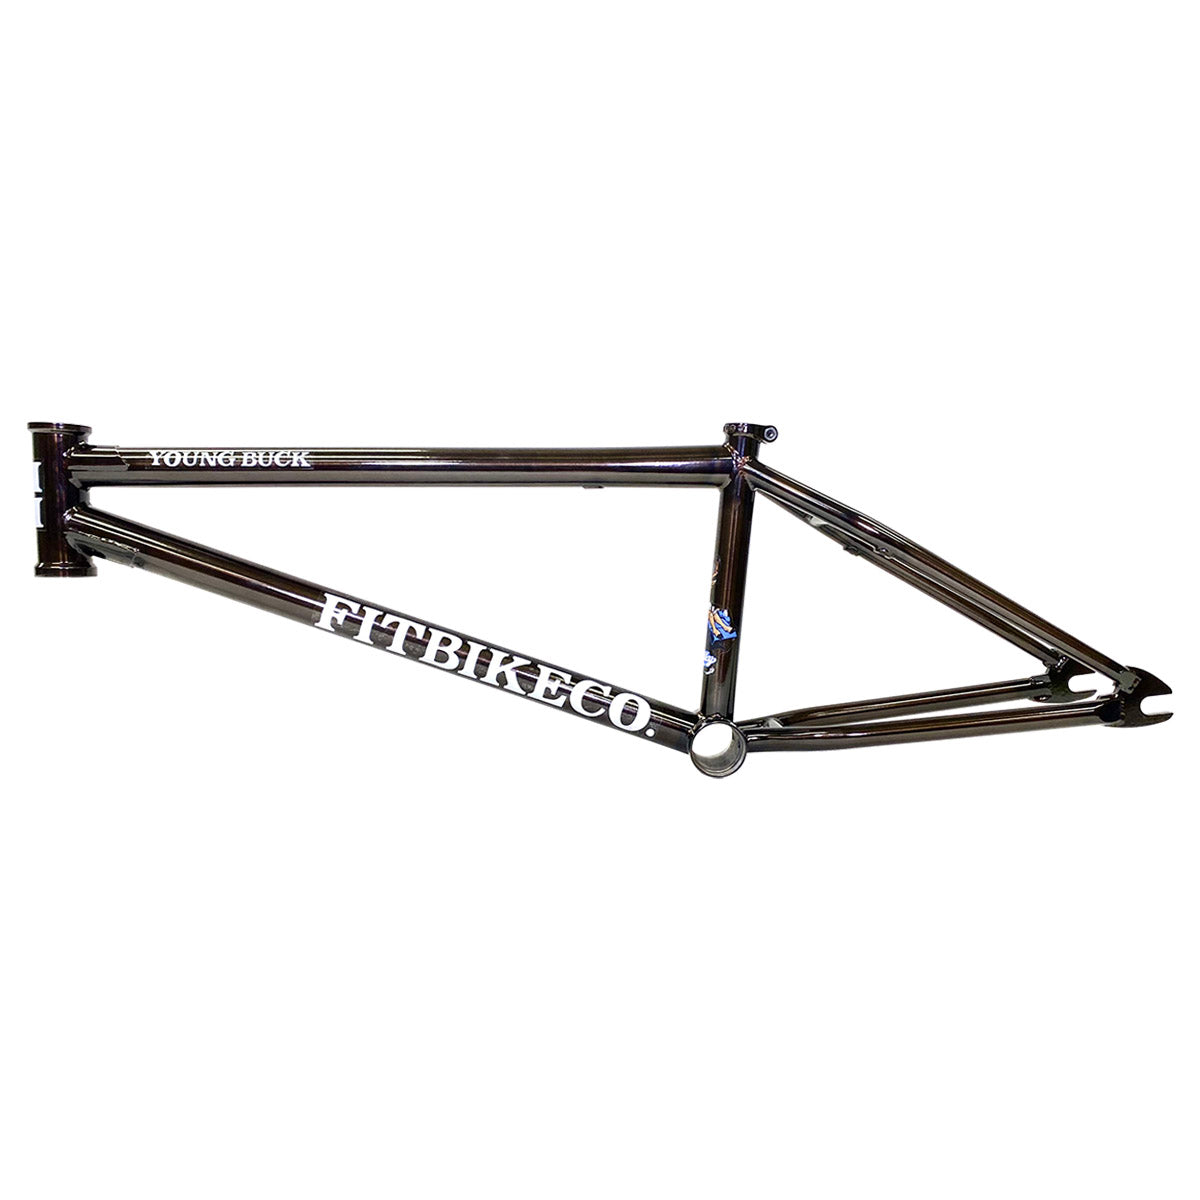 FITBIKECO YOUNG BUCK FRAME (MIKEY ANDREW COLORWAY)